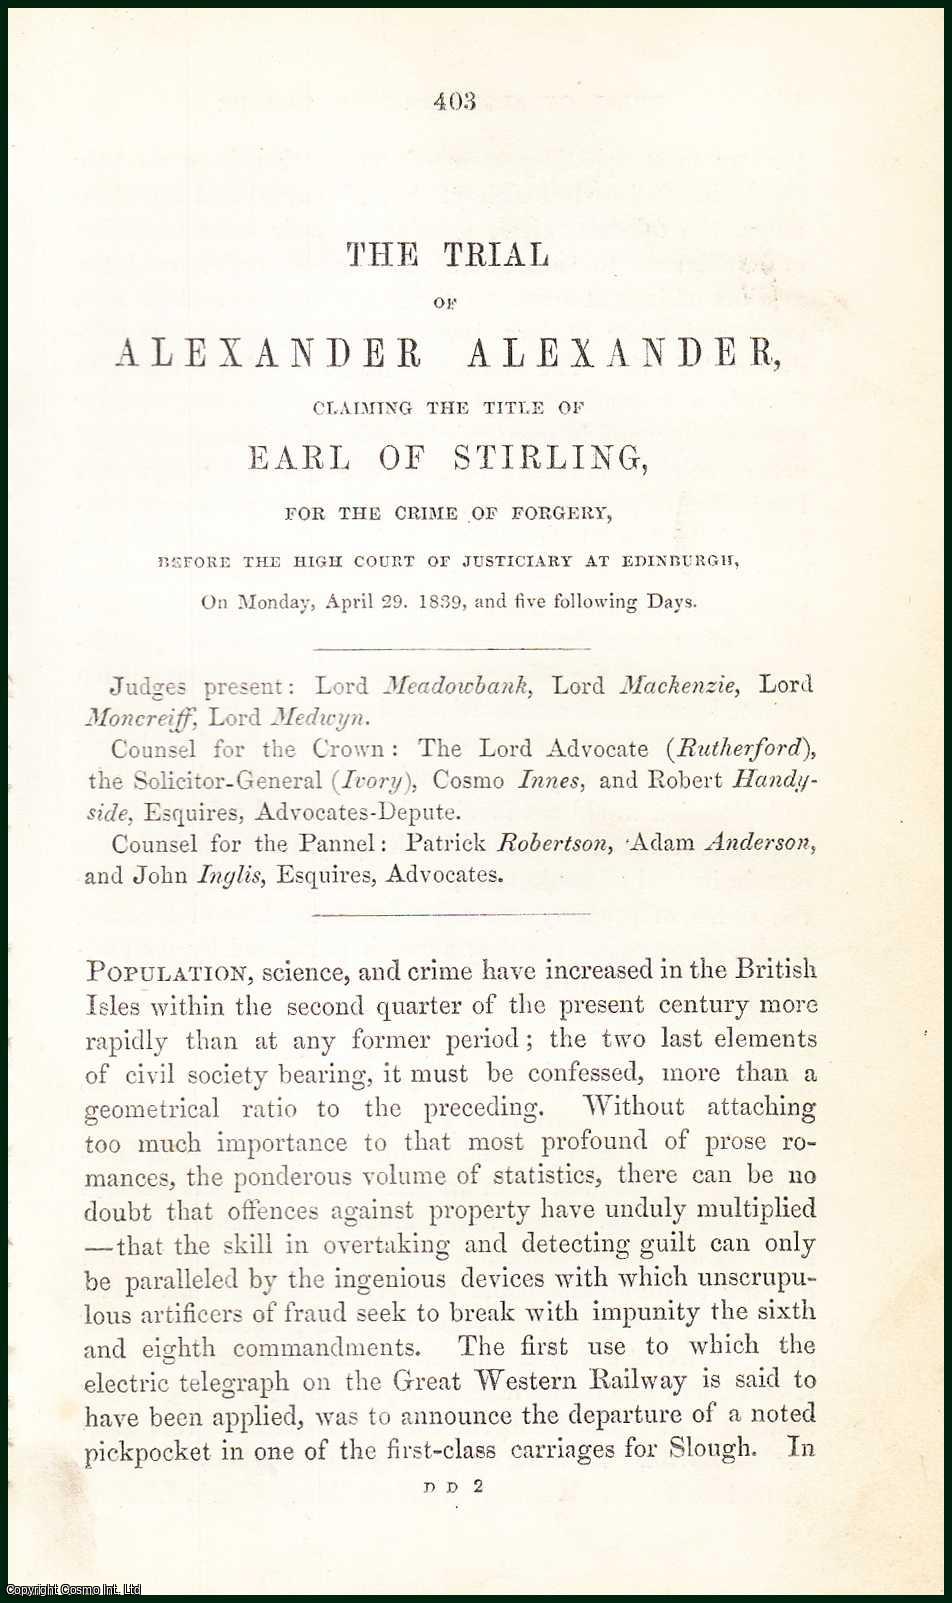 [Trial] - The Trial of Alexander Alexander, Claiming The Title of Earl of Stirling, for The Crime of Forgery, Before The High Court of Justiciary at Edinburgh, 1839. An uncommon original article from the Collected State Trials, 1850.